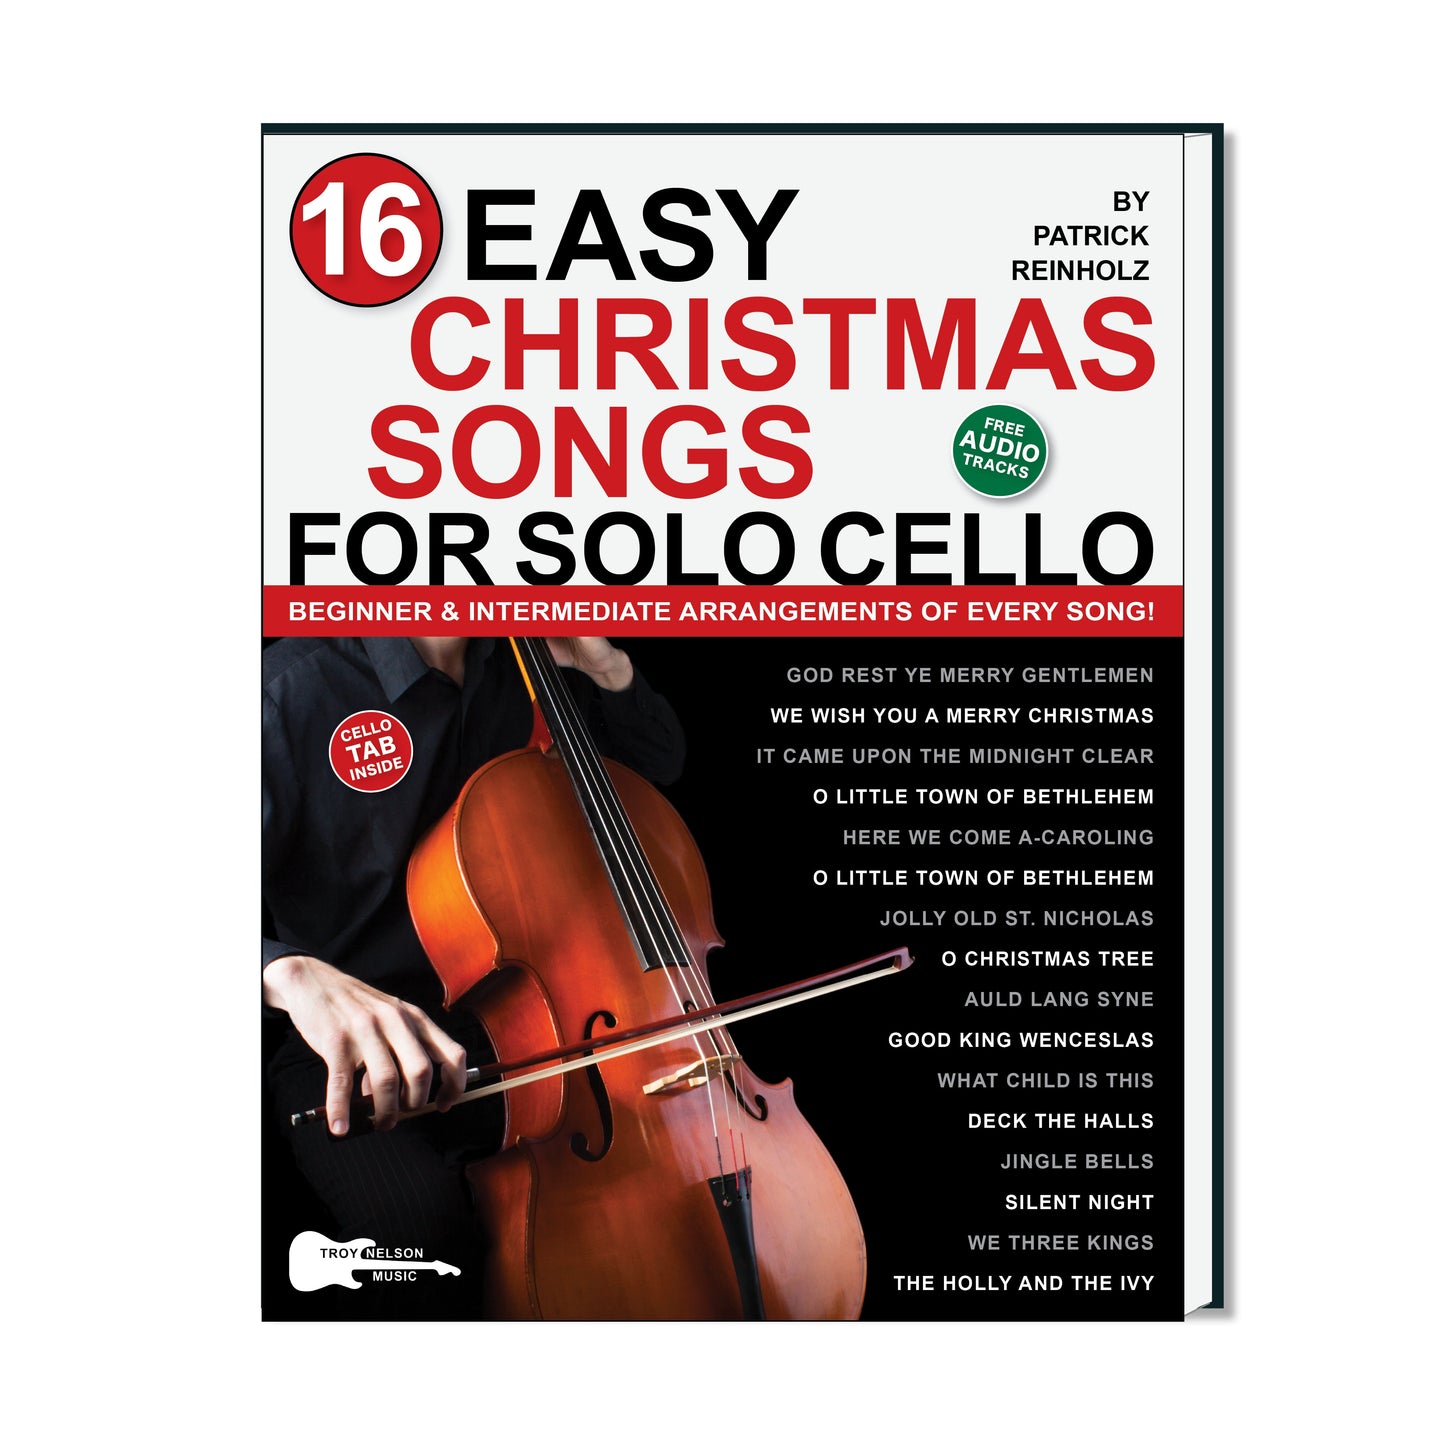 cello book cover with Christmas decorations